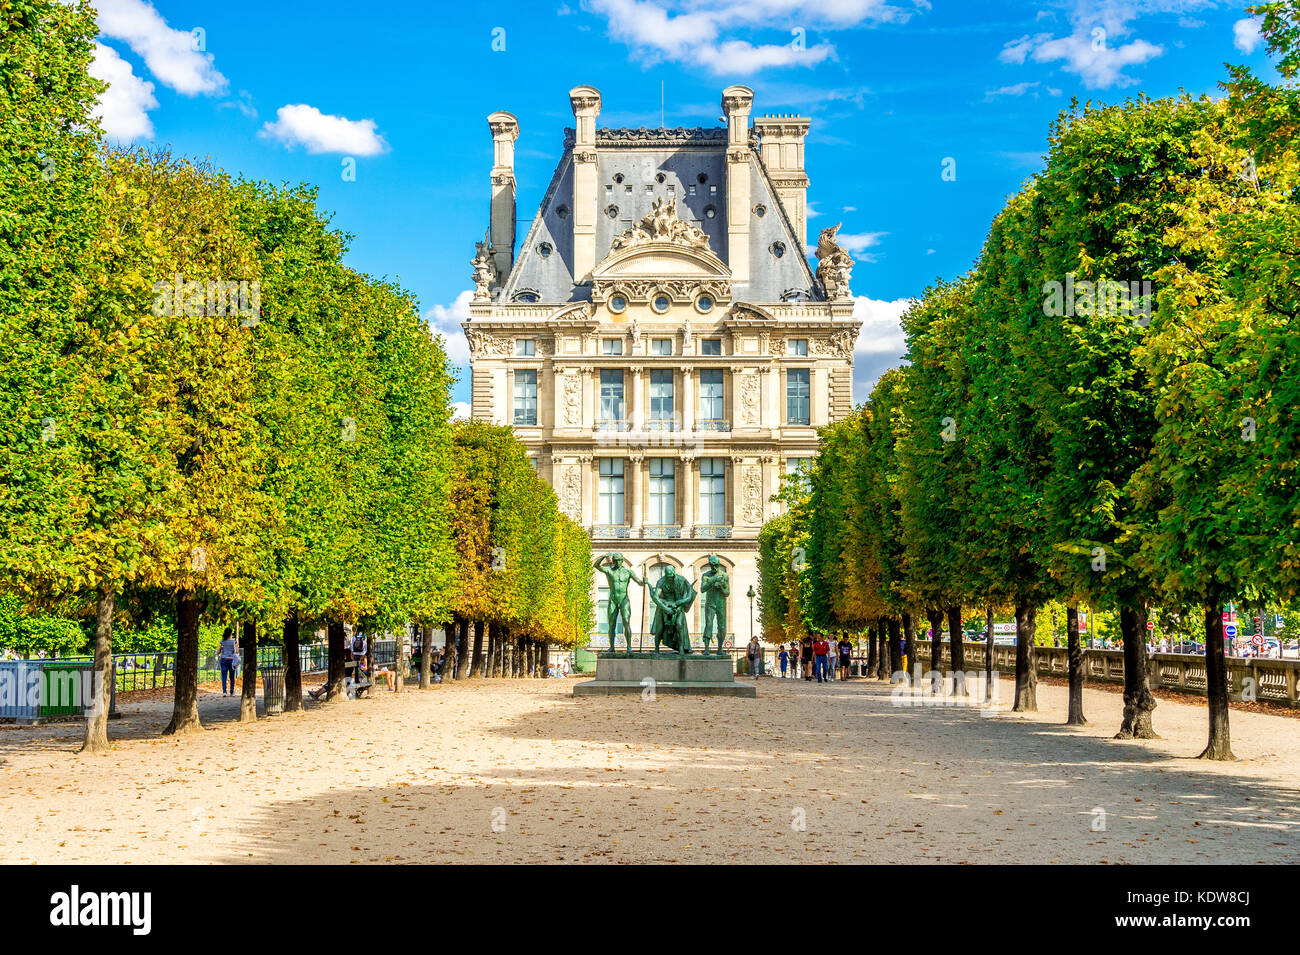 The Jardin des Tuileries (Tuileries Garden), and the beautiful architecture of the Louvre is on display in the background. Paris, France Stock Photo